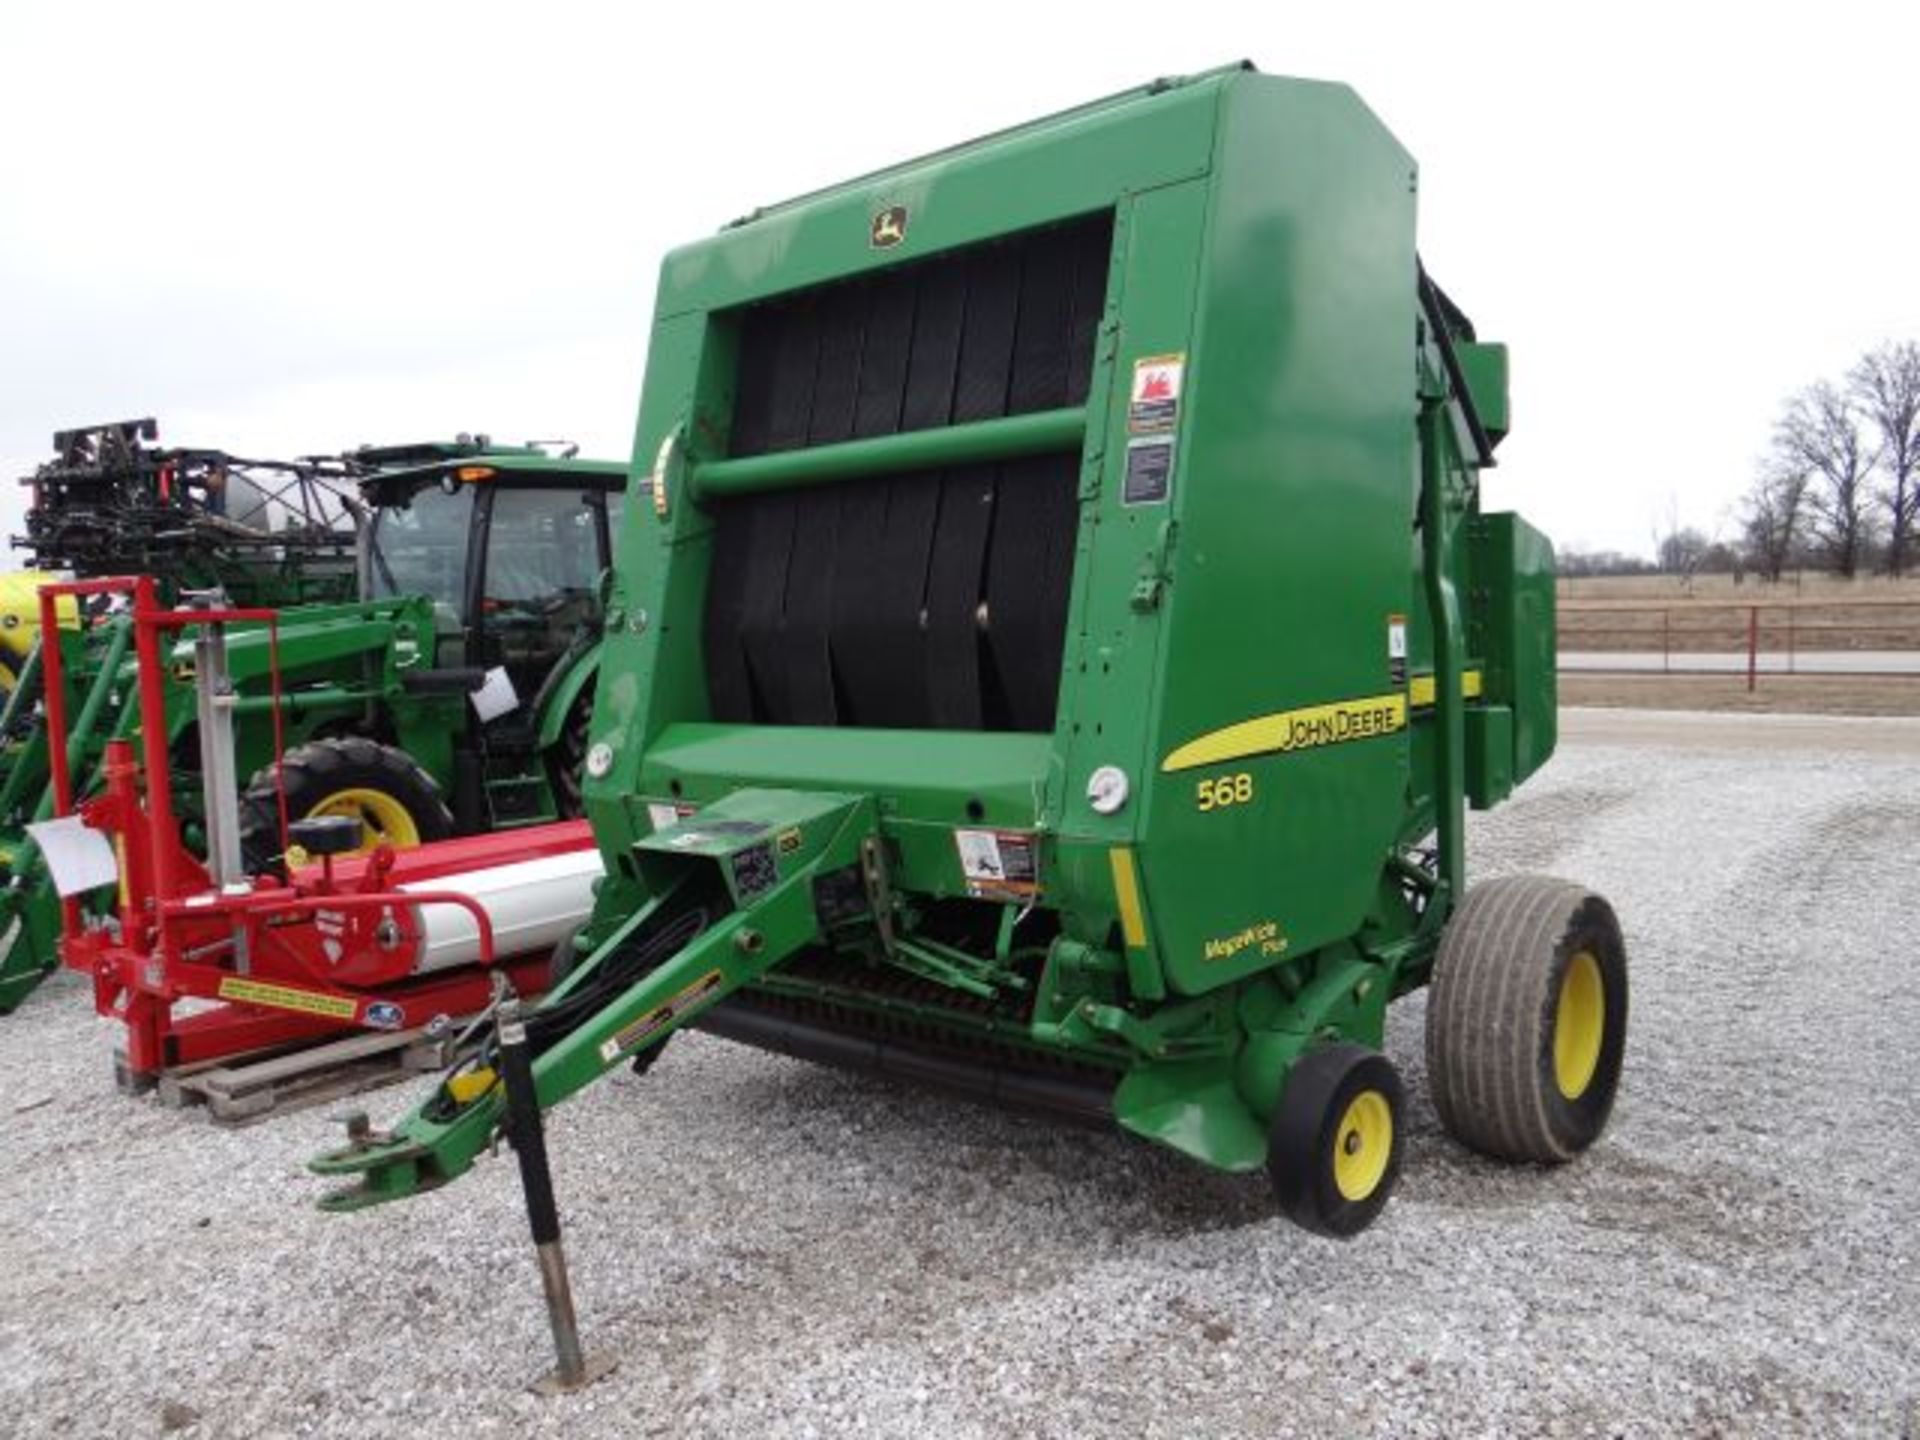 JD 568 Round Baler 10,100 bales, Monitor in the Shed